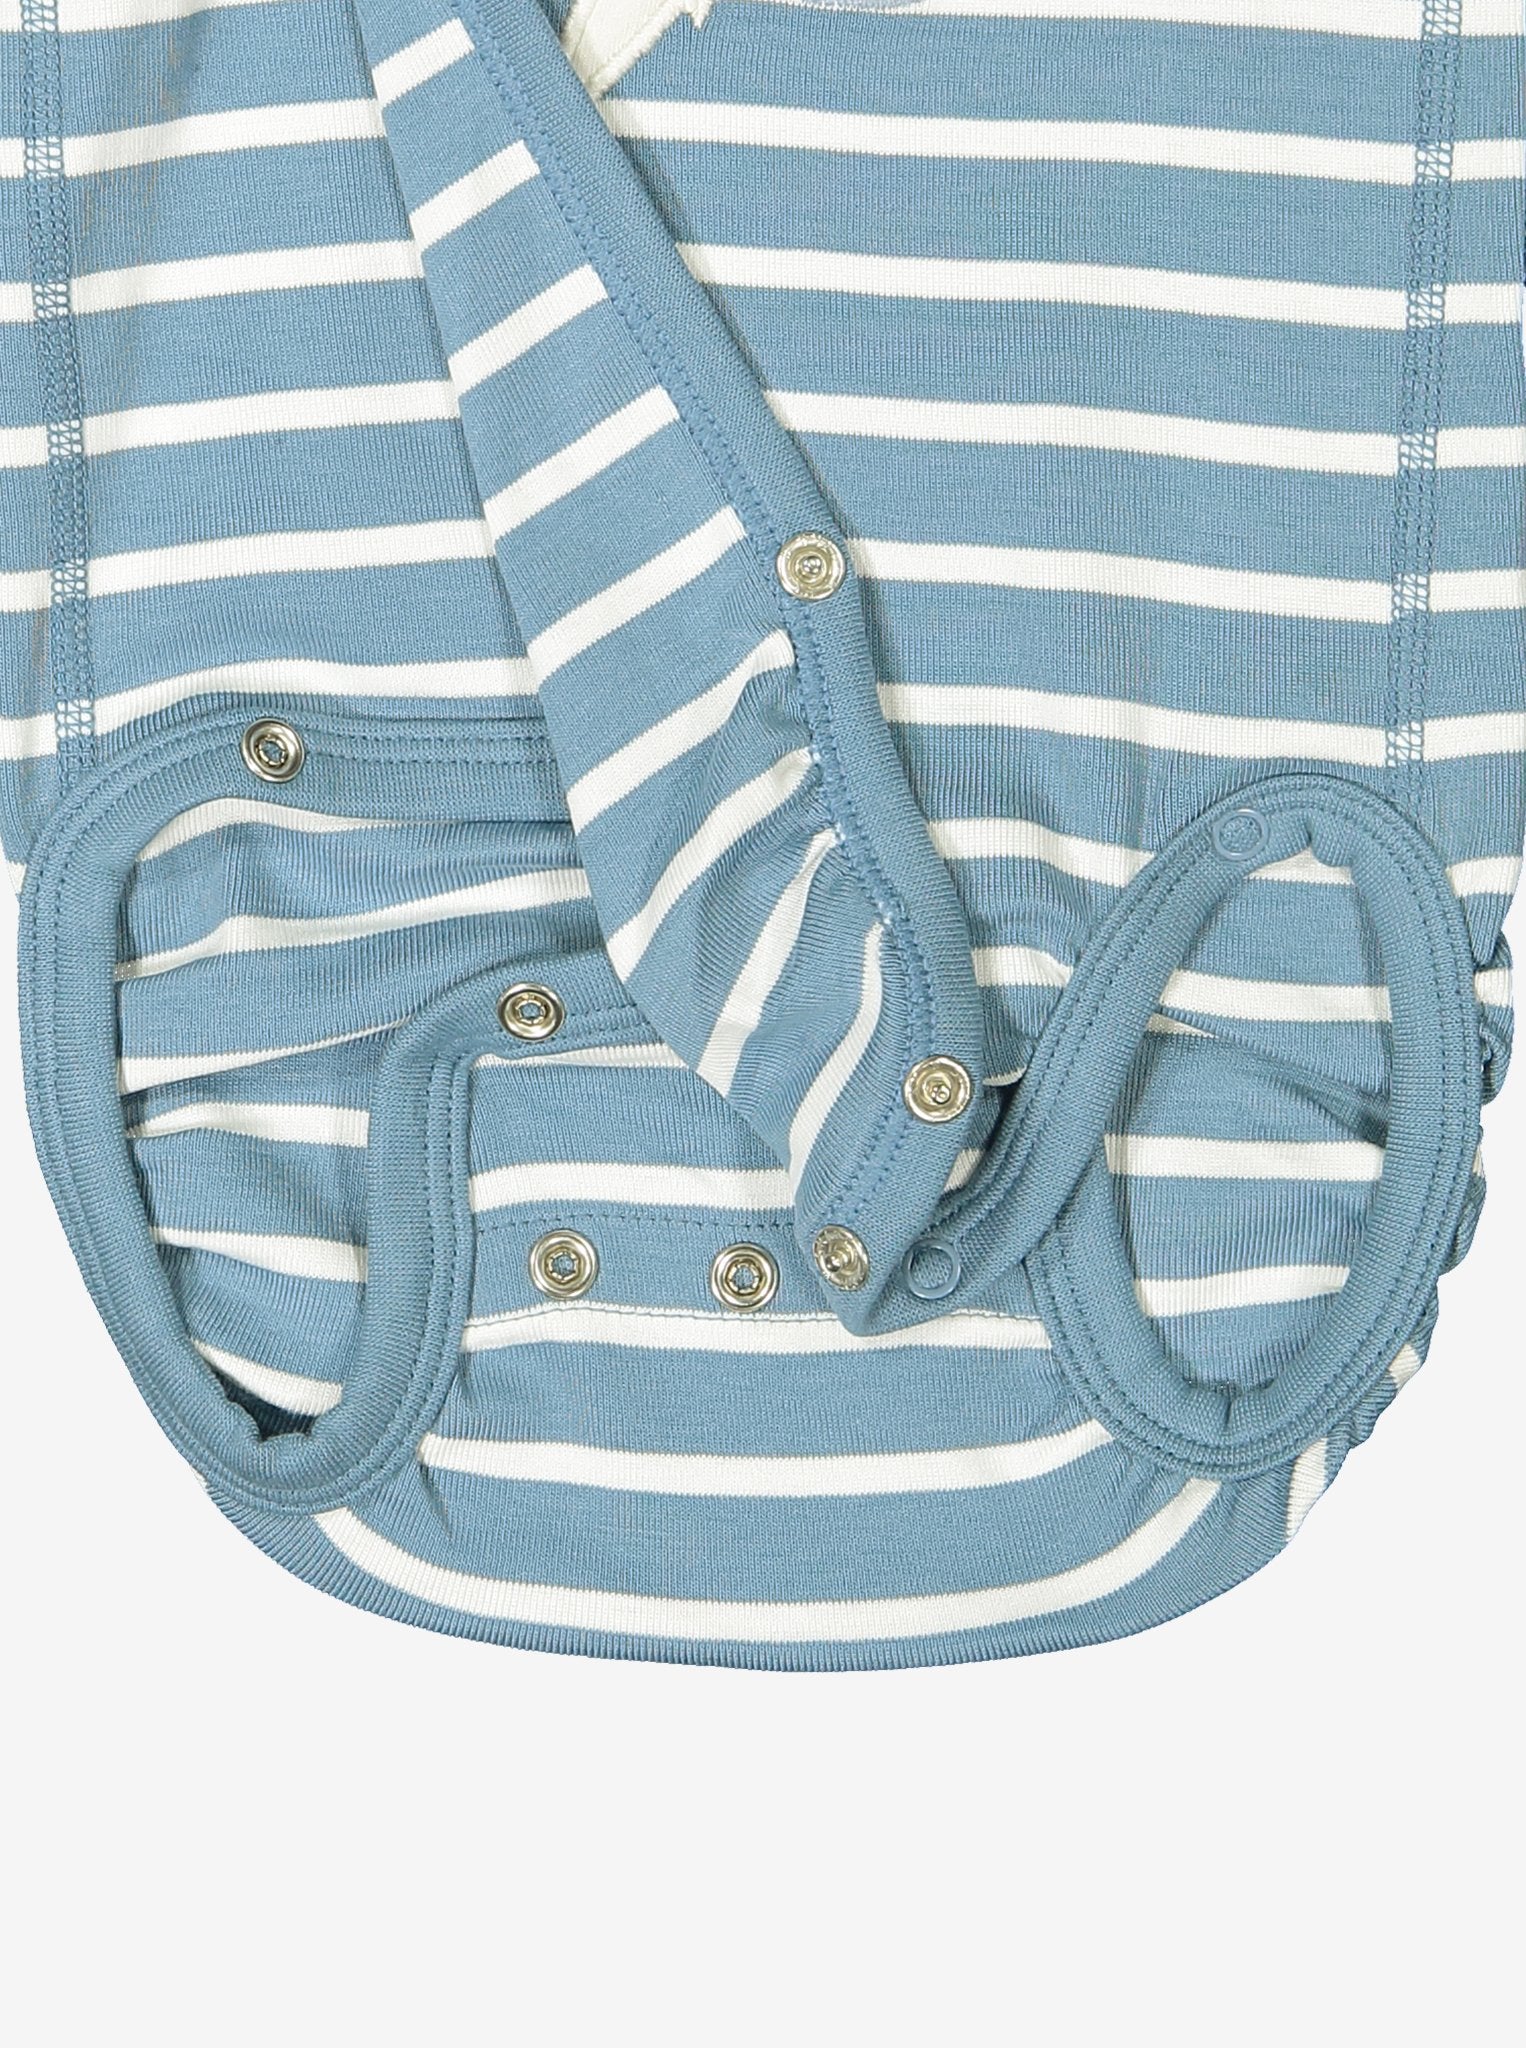 Close up of unisex blue and white striped wraparound organic cotton newborn babygrow showing easy popper fastening for speedy changes